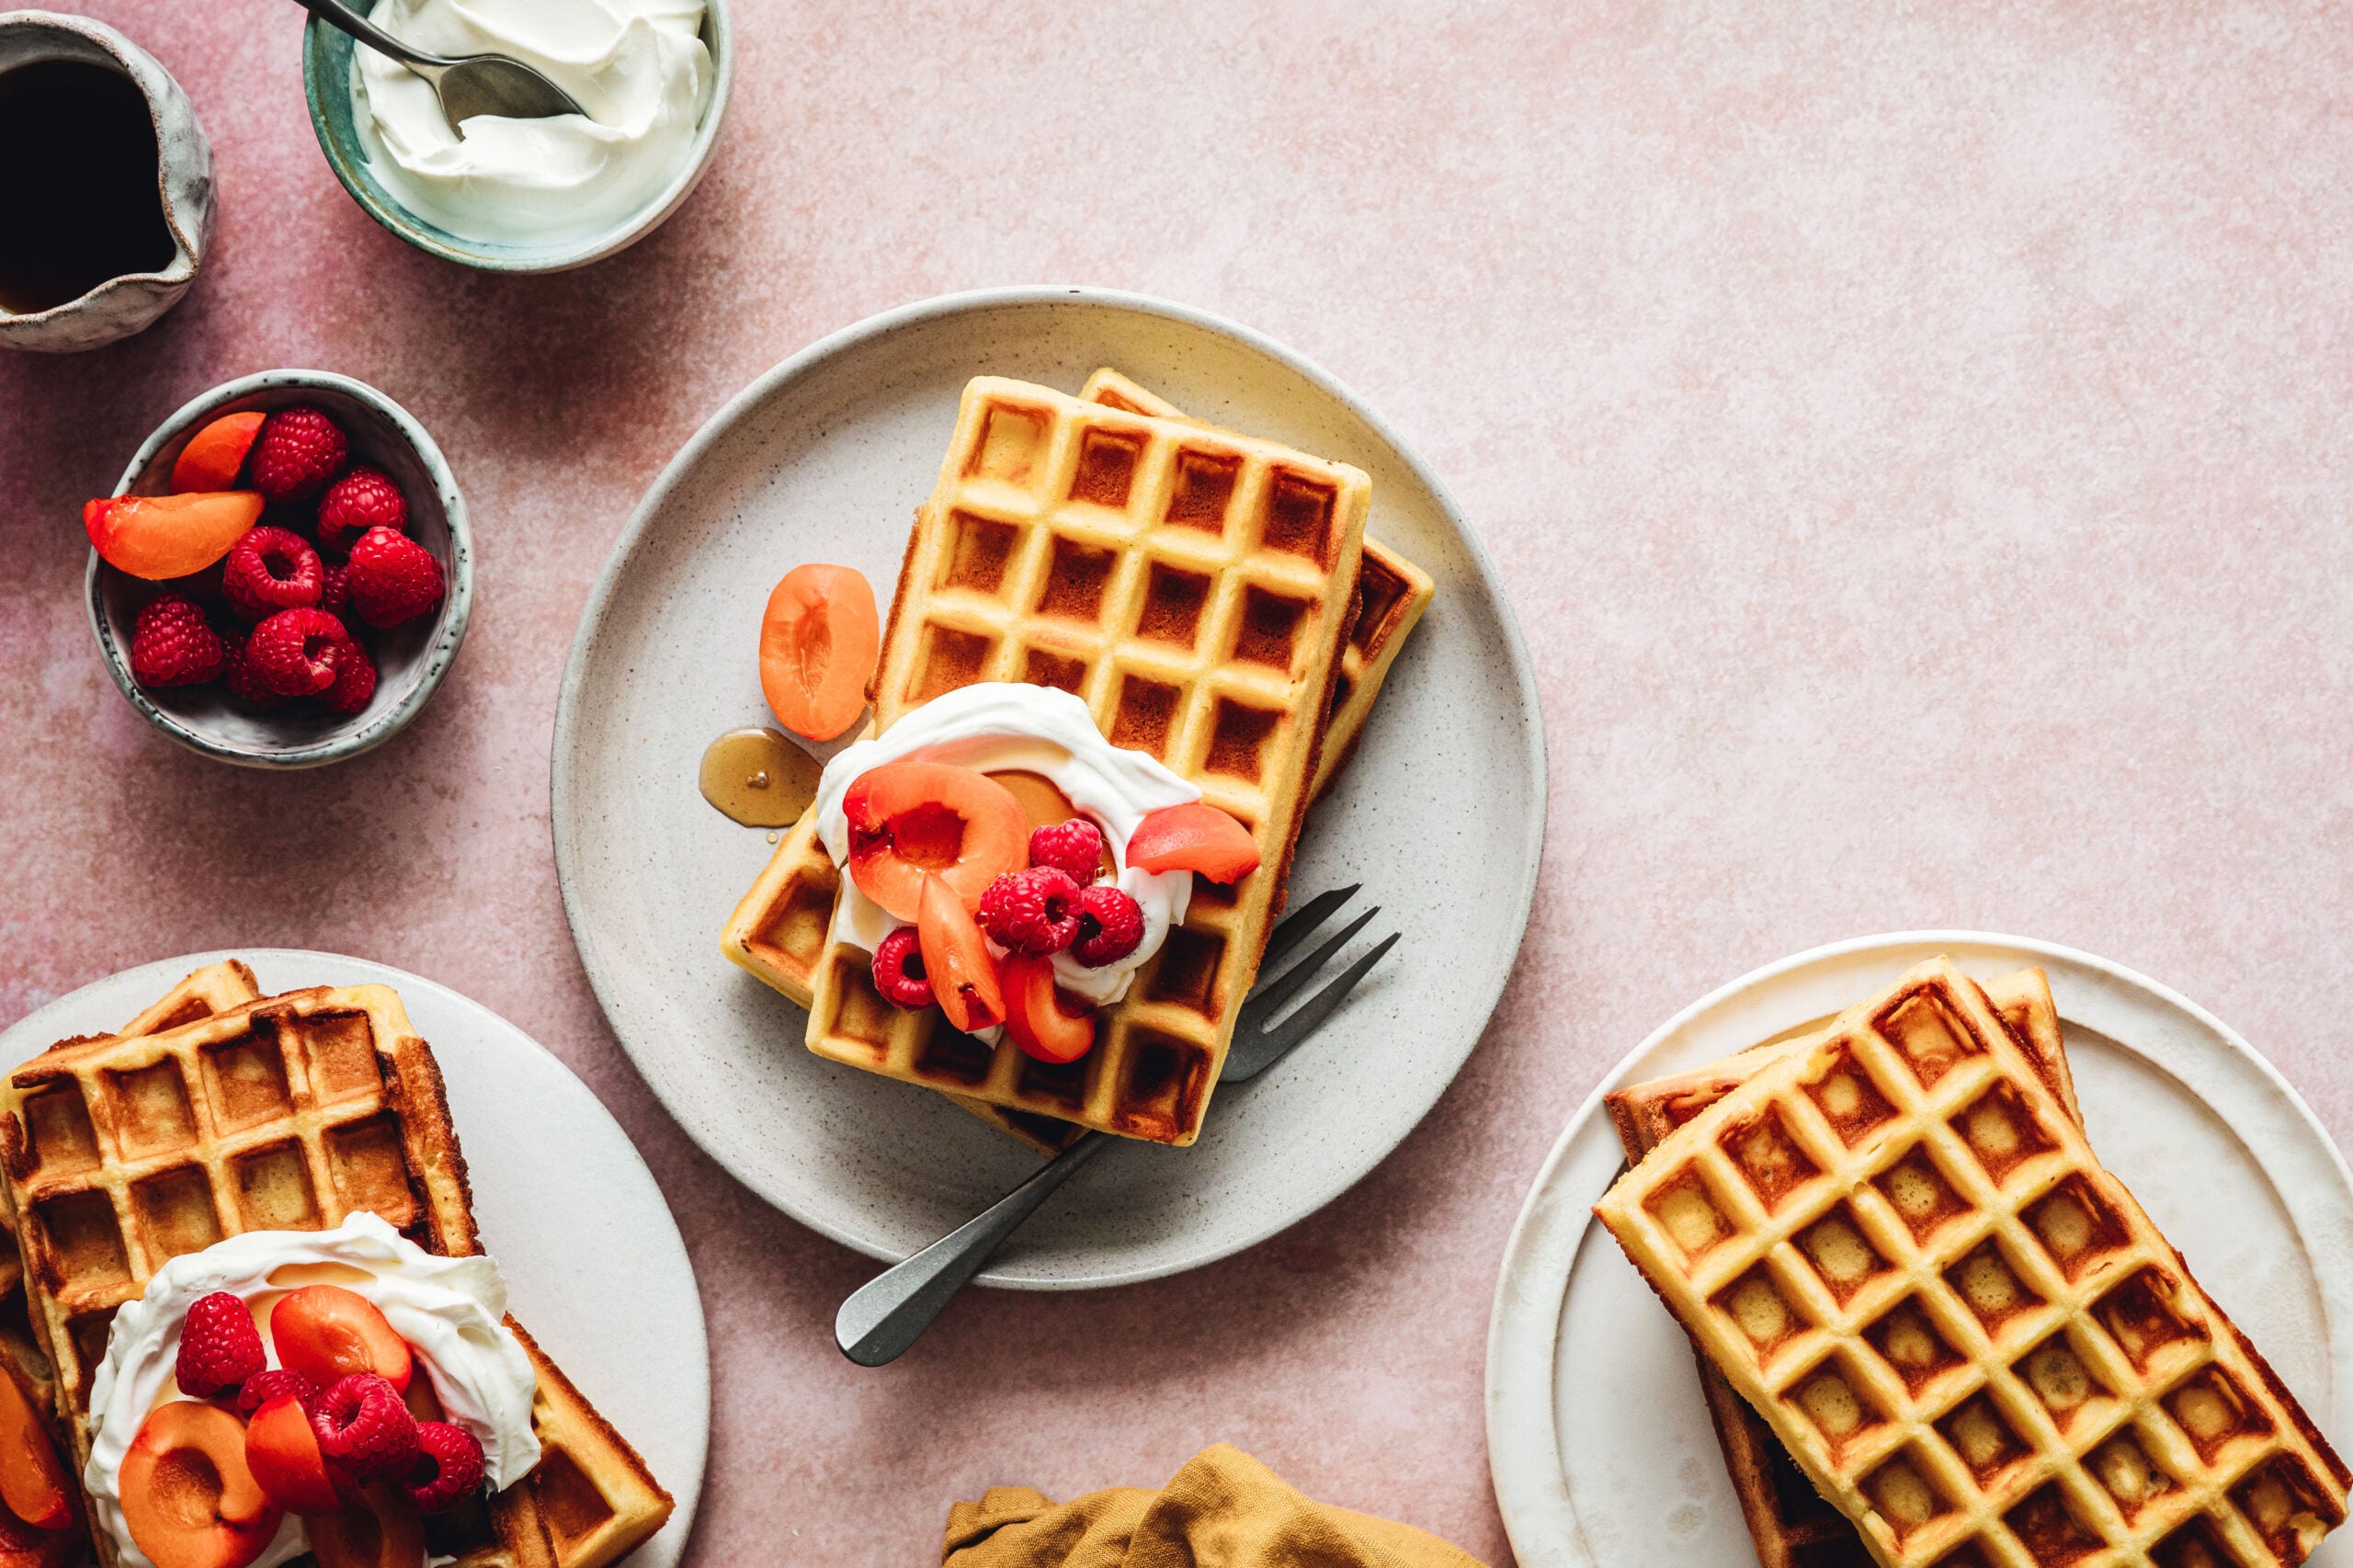 Cuisinart Vertical Waffle Maker Review: It's one stand-up kitchen